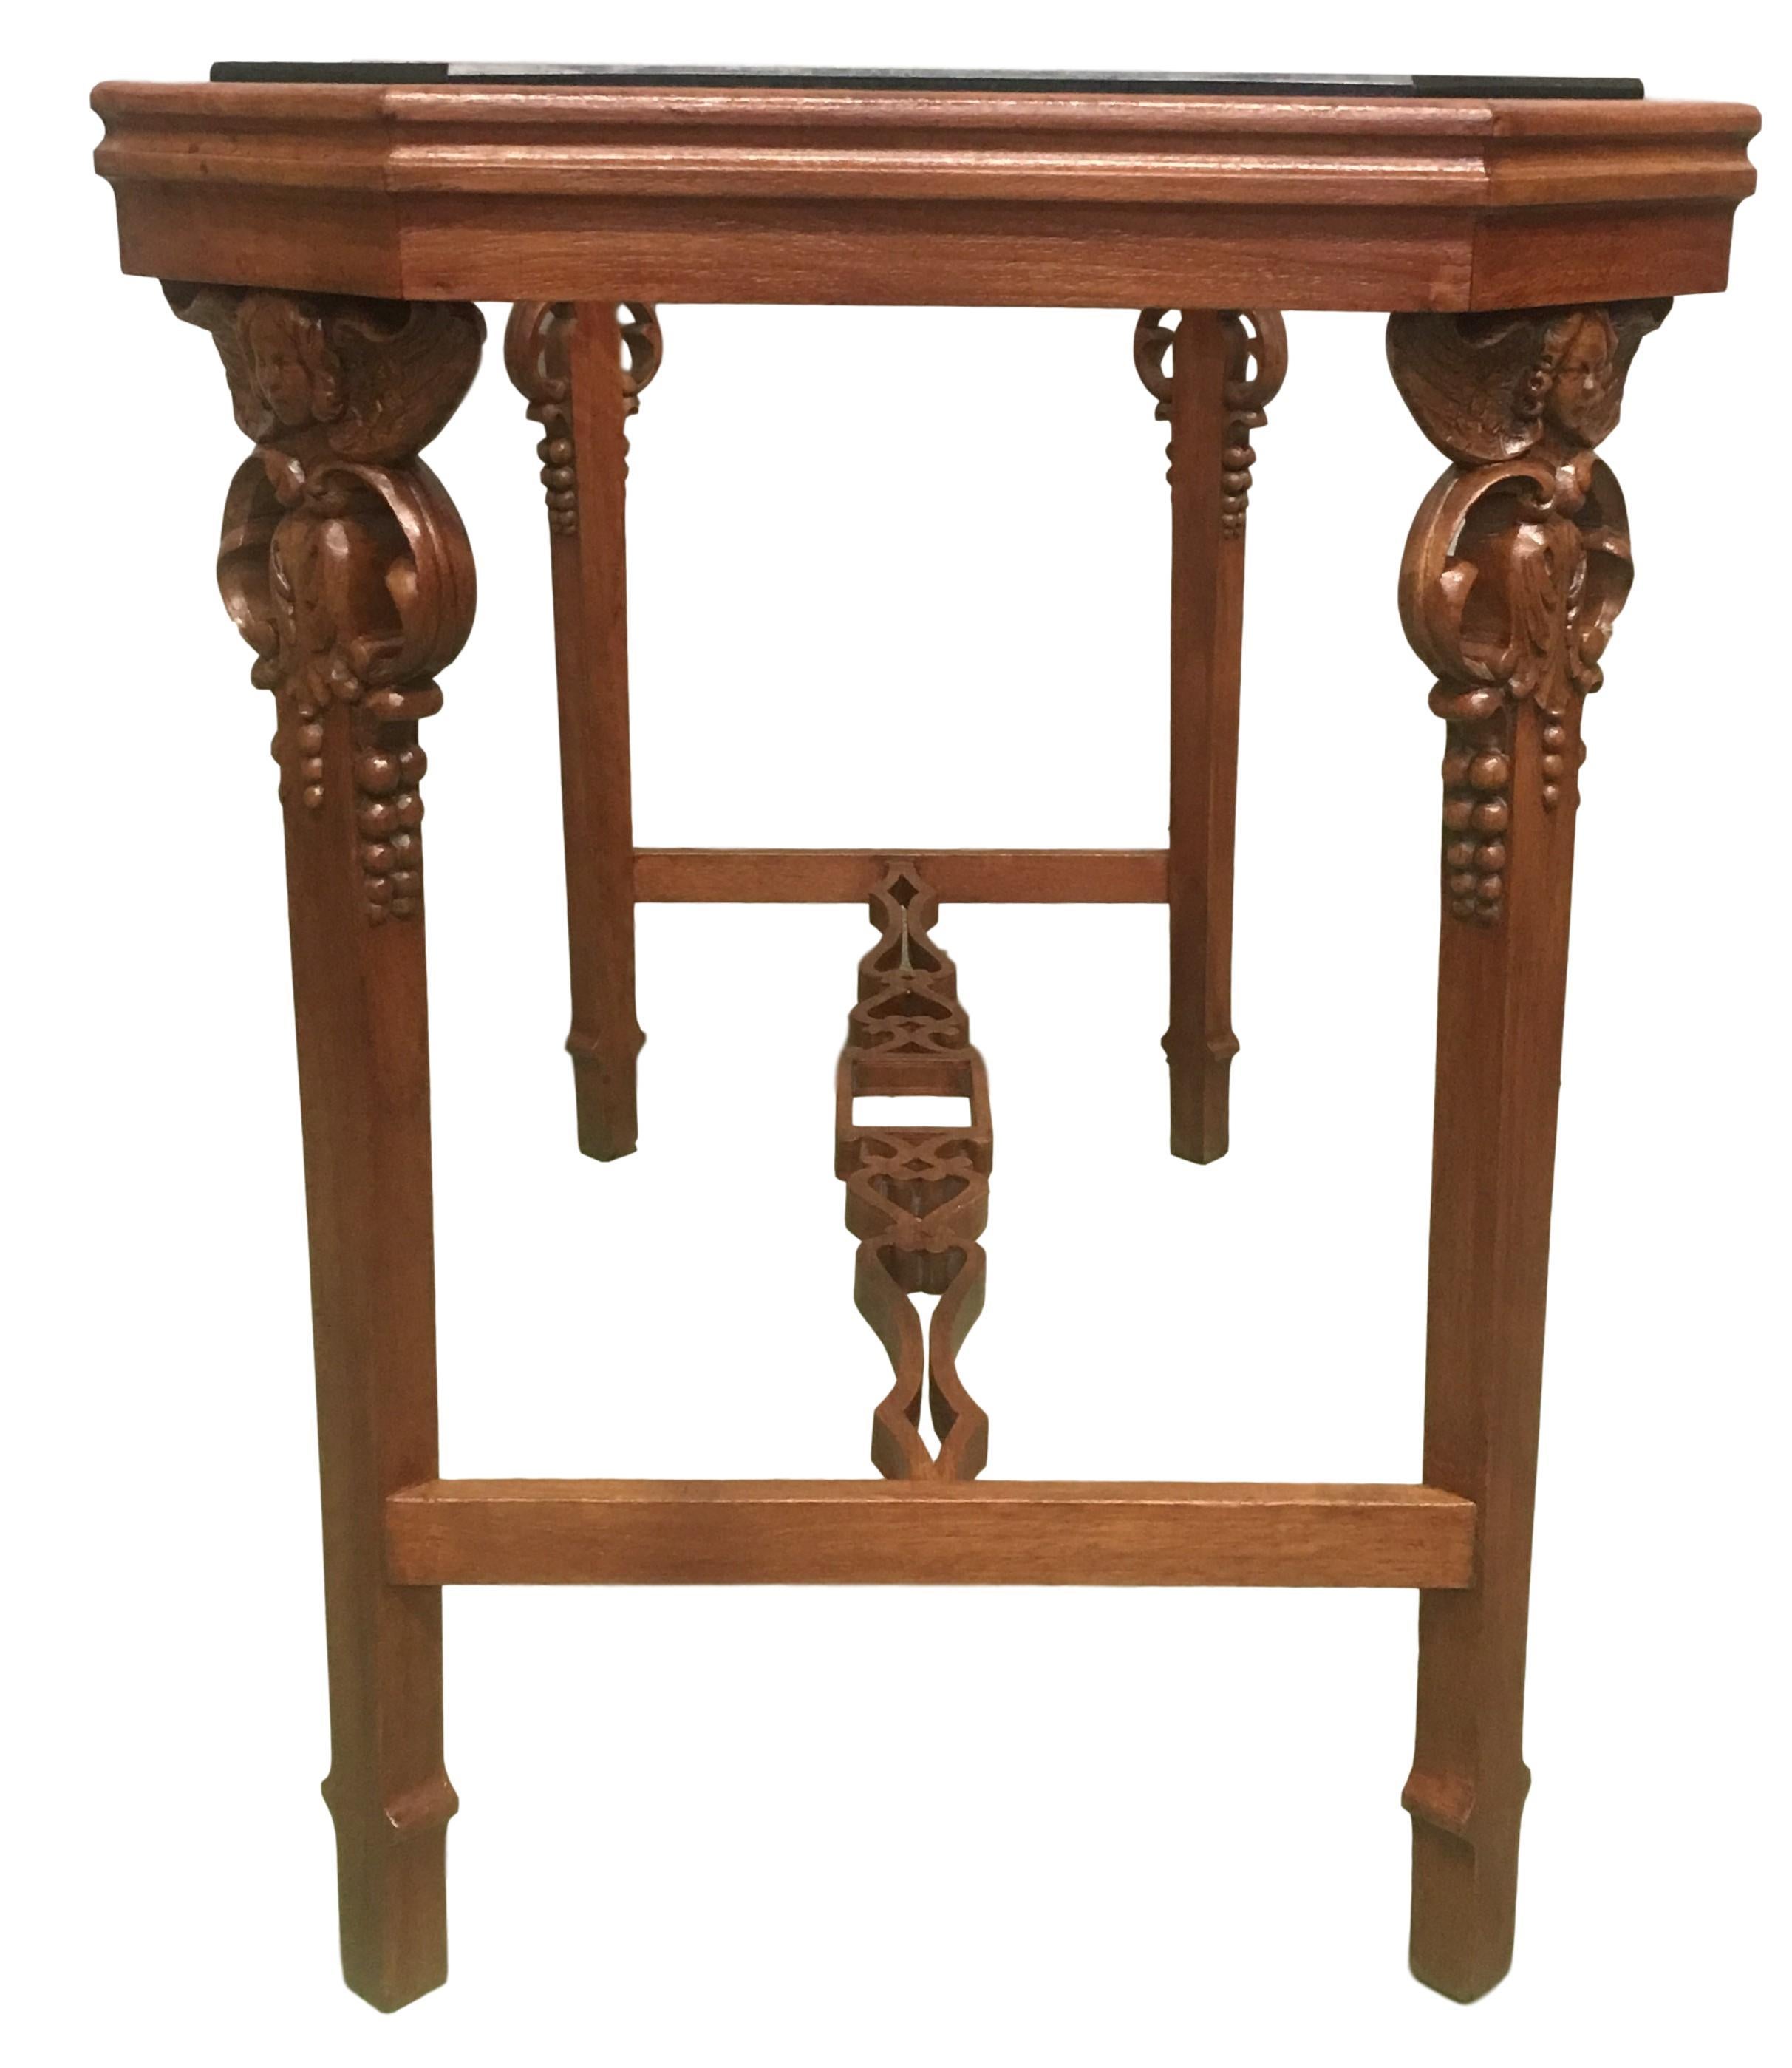 Turn of the century English Arts & Crafts four legs table with a canted corner top with carved cherubs in the four legs.